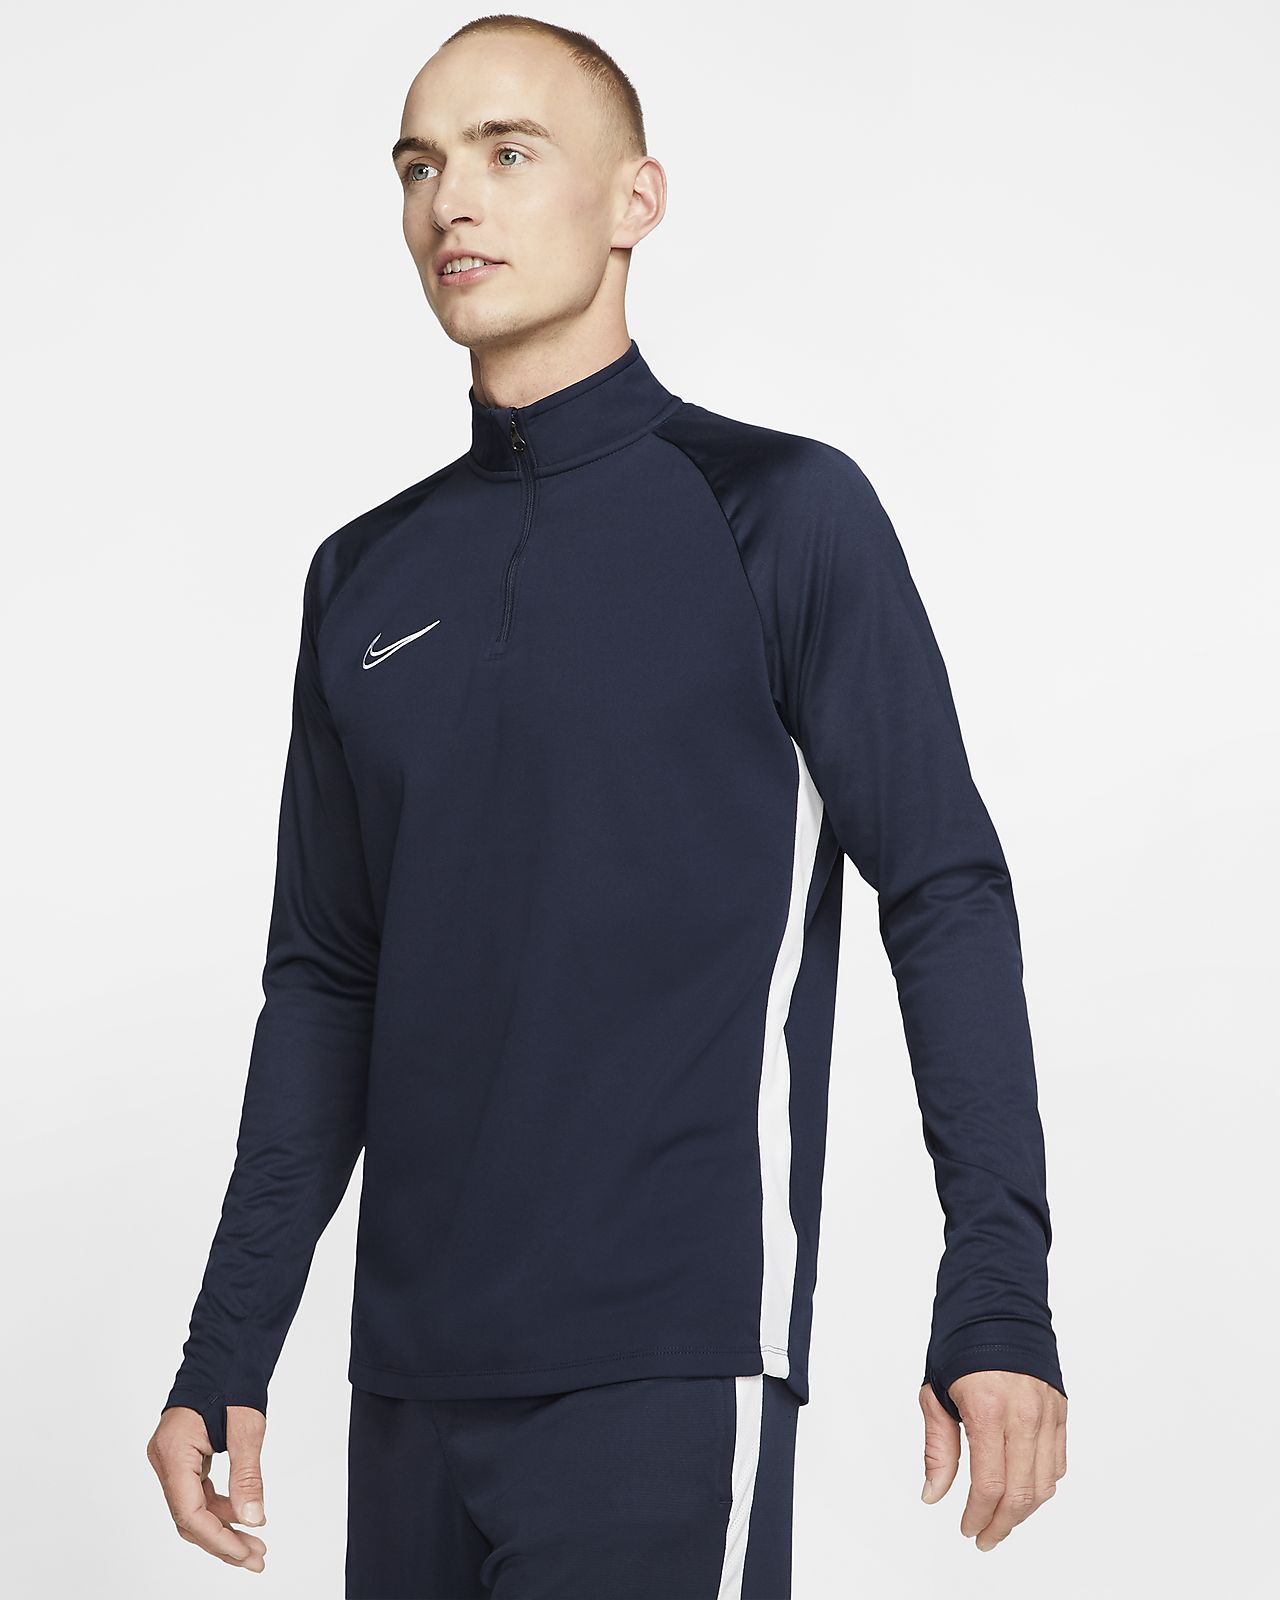 Buy > nike football academy quarter zip drill top in blue > in stock